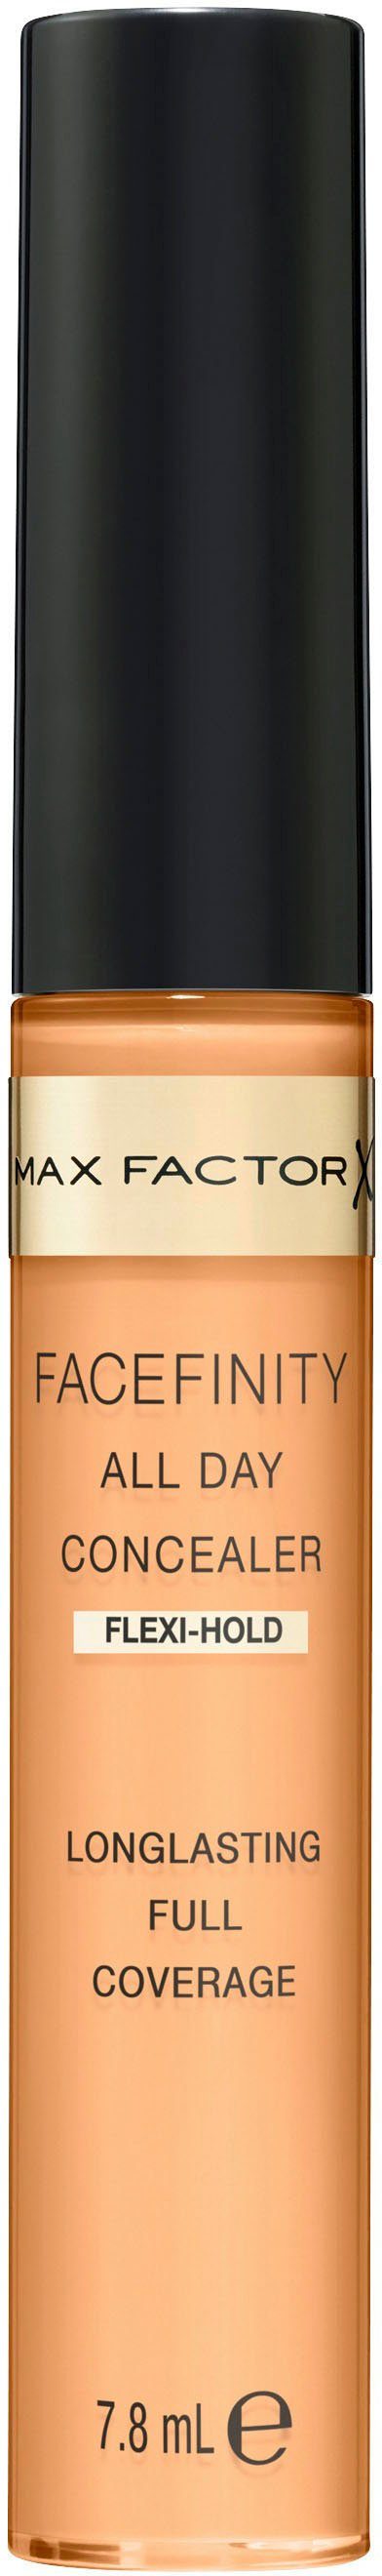 MAX FACTOR 70 Day All FACEFINITY Concealer Flawless